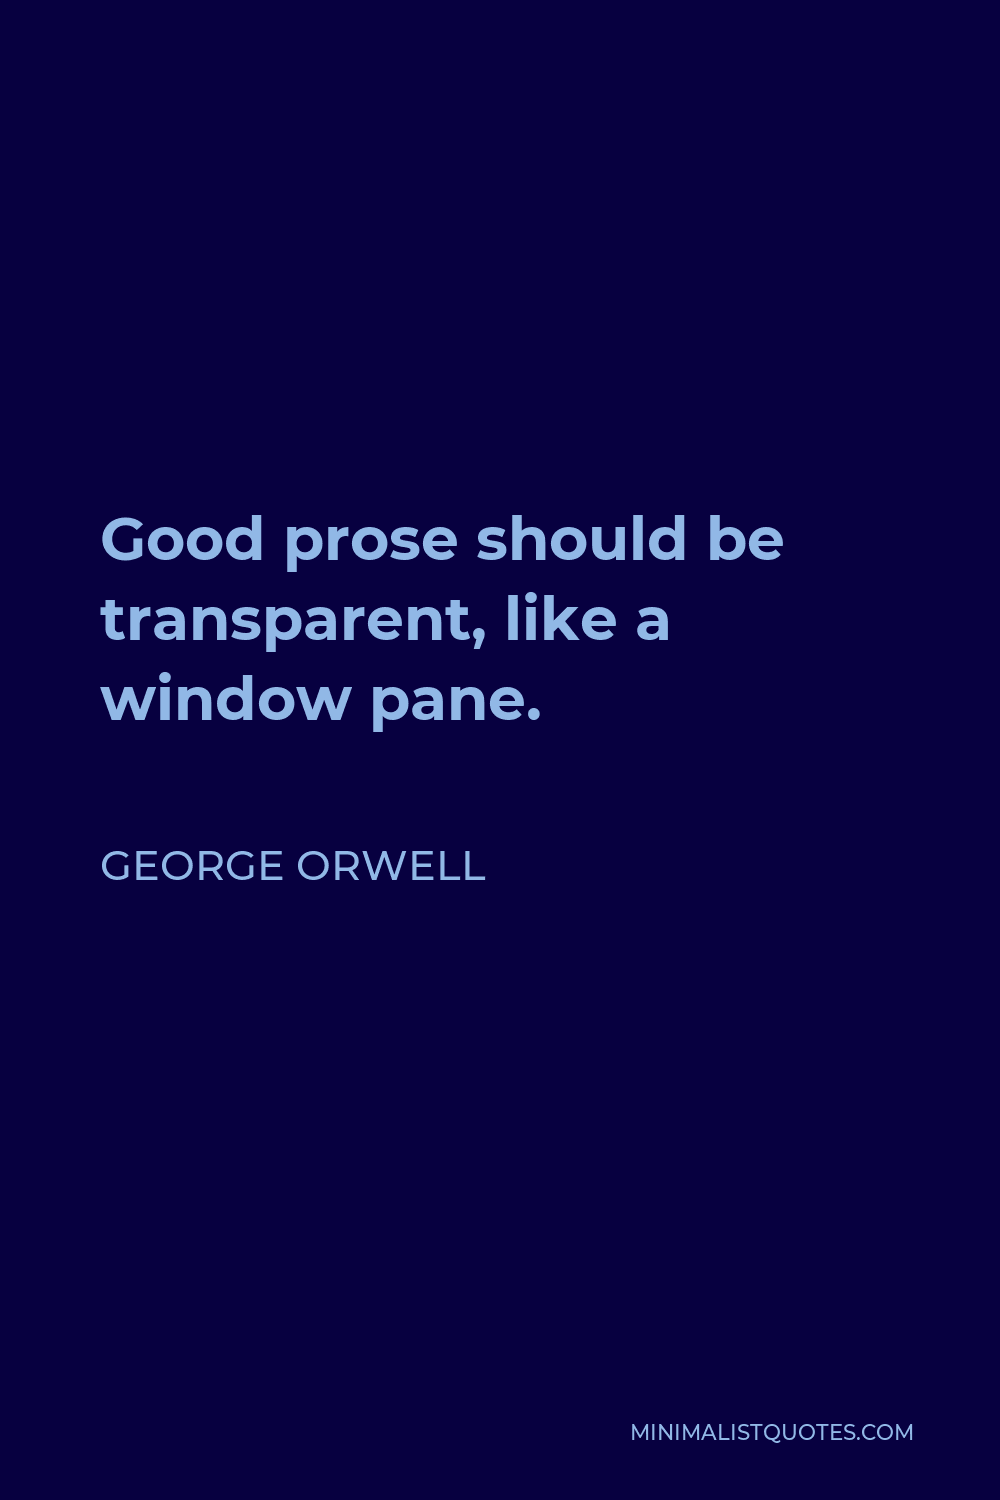 George Orwell Quote - Good prose should be transparent, like a window pane.